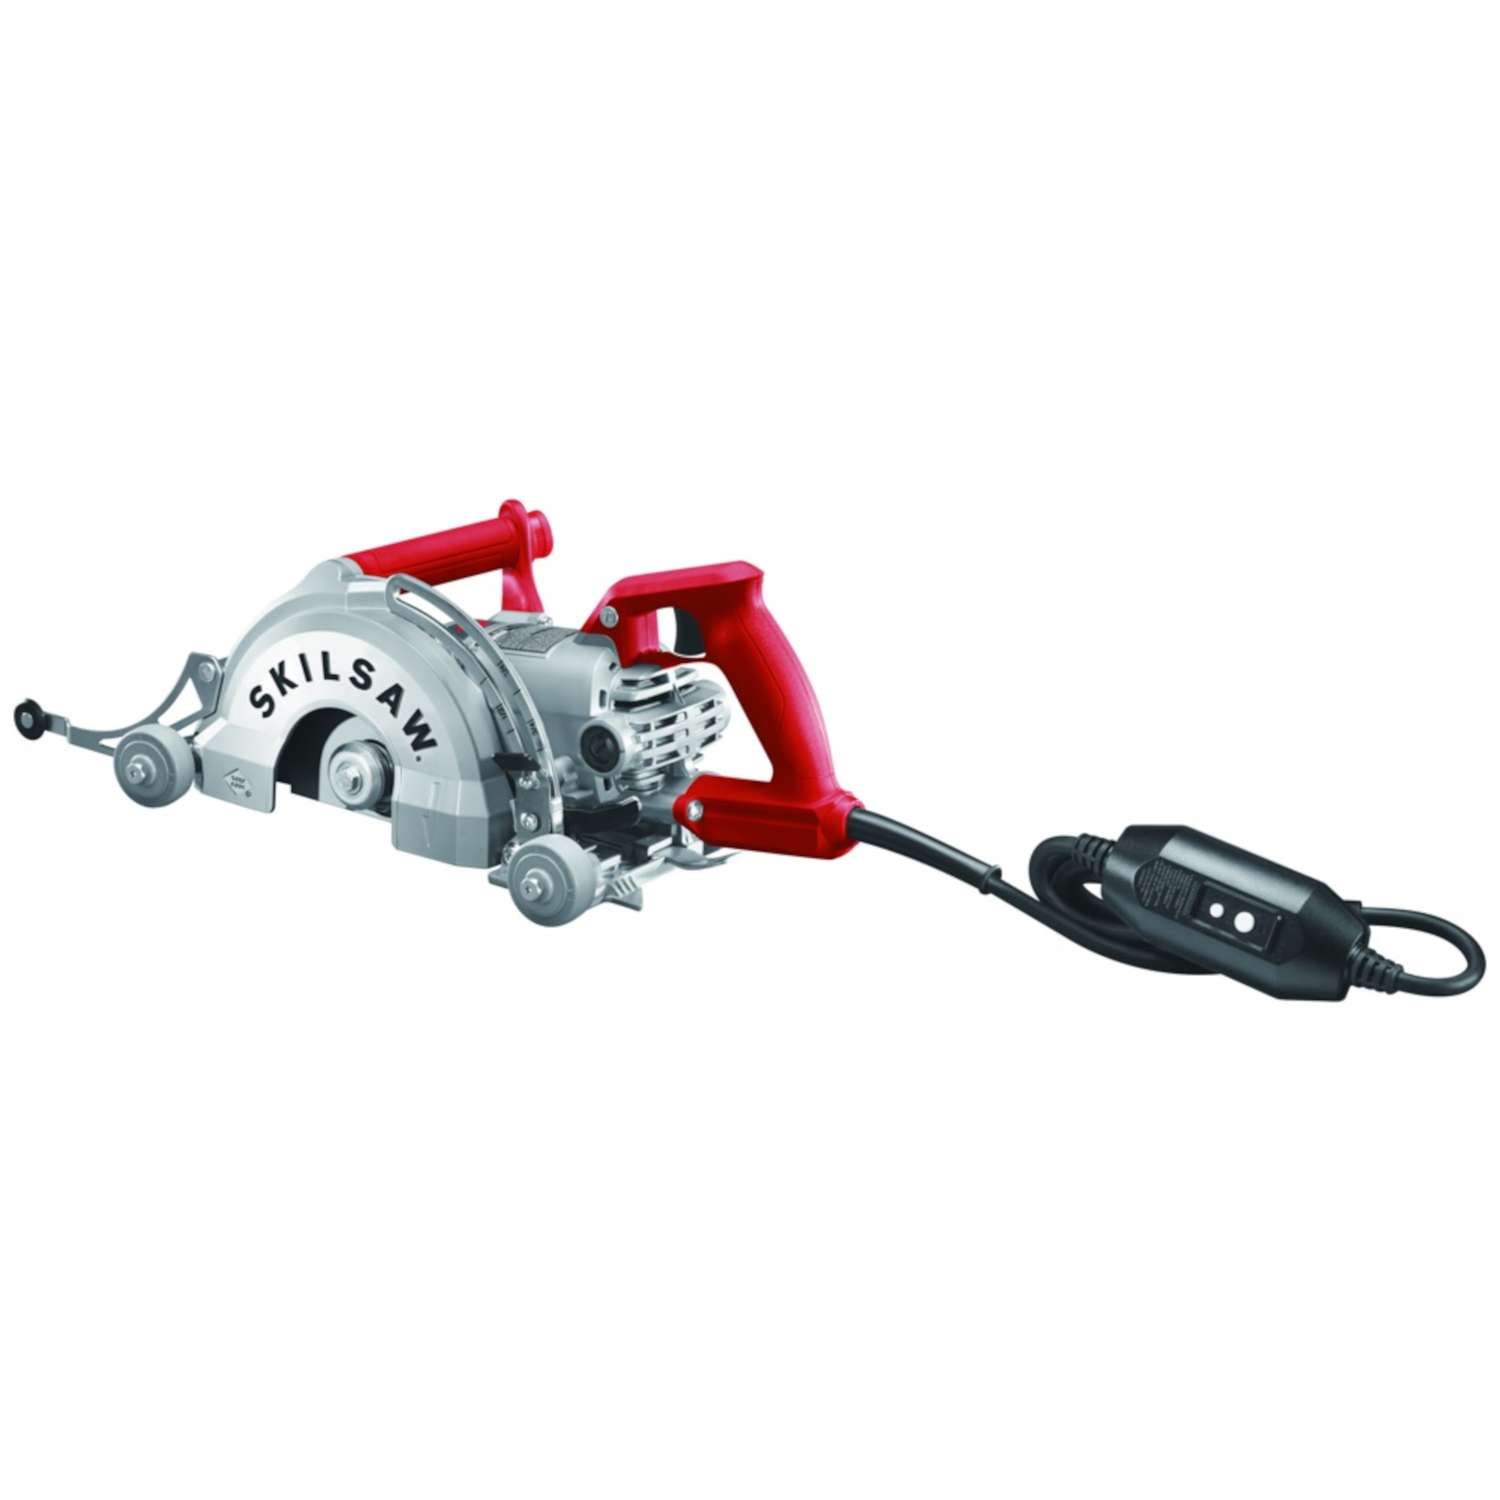 SKIL 15 amps in. Corded Brushed Worm Drive Circular Saw Ace Hardware